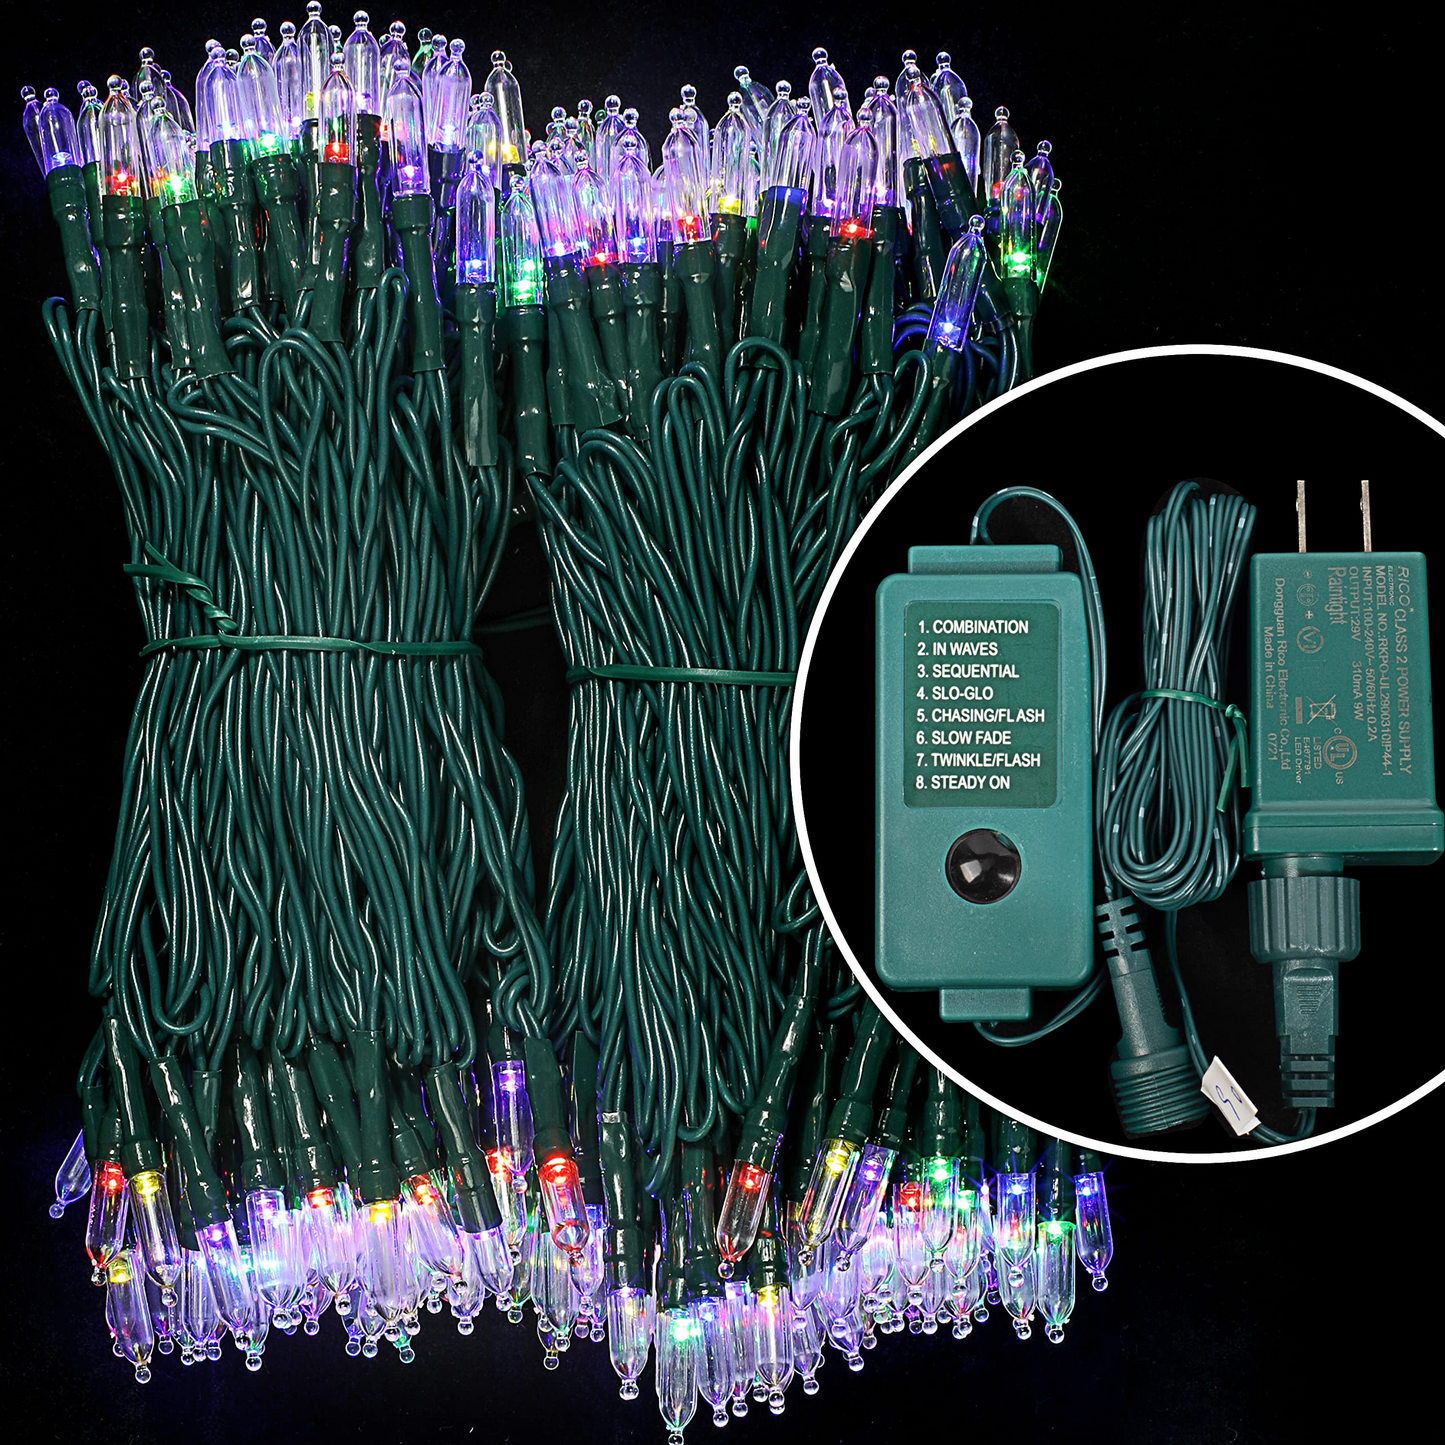 300 Multicolor LED Green Wire String Lights